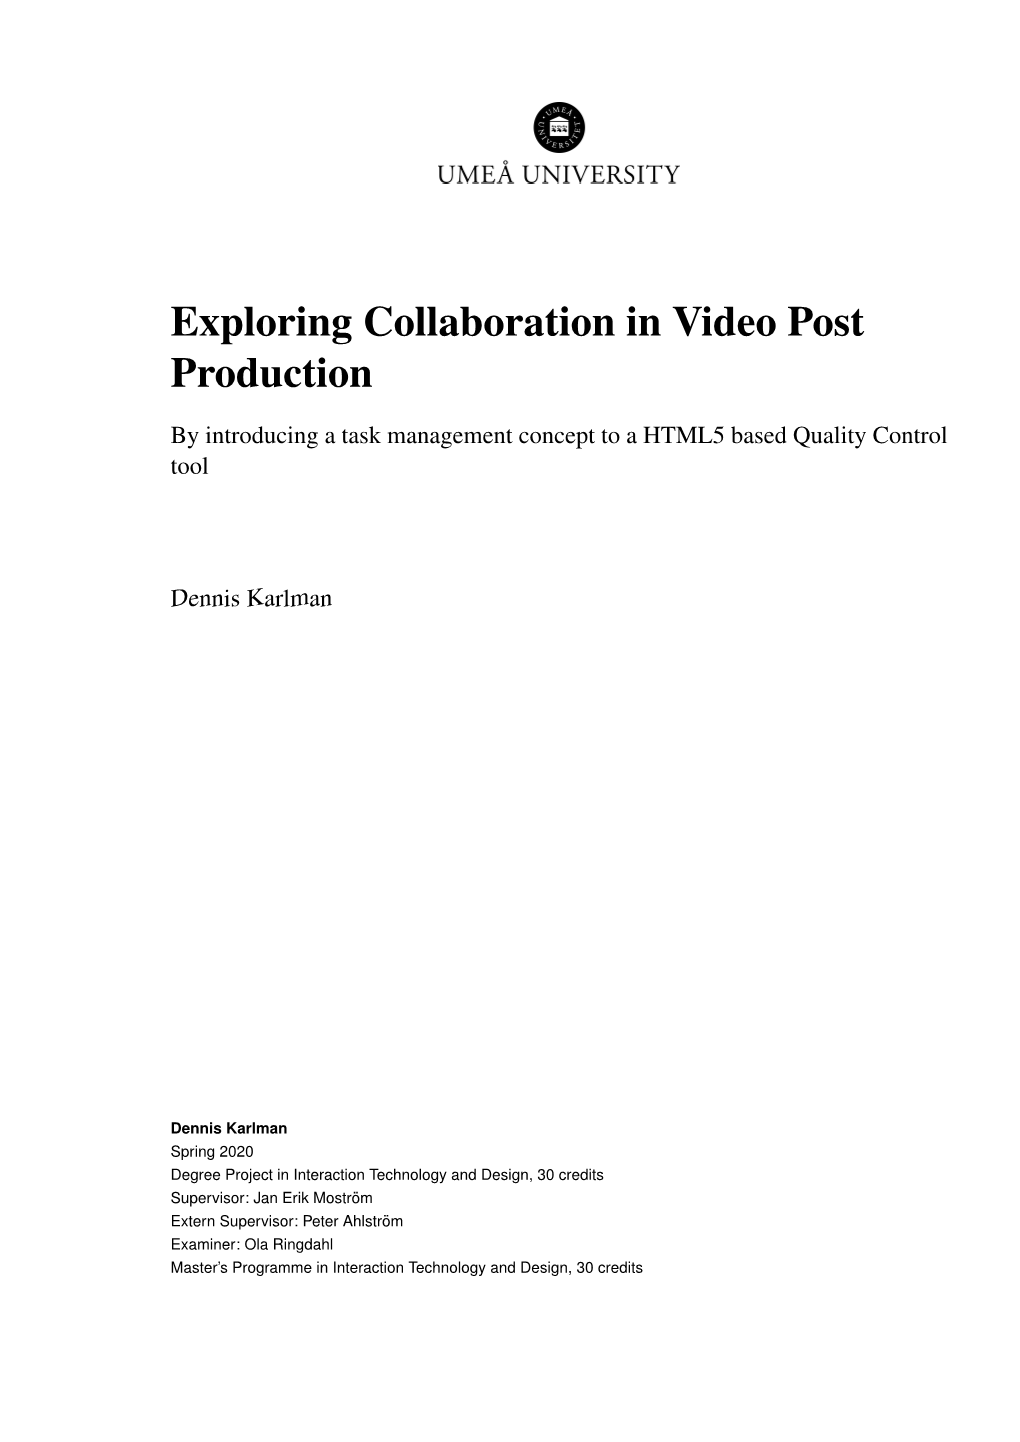 Exploring Collaboration in Video Post Production